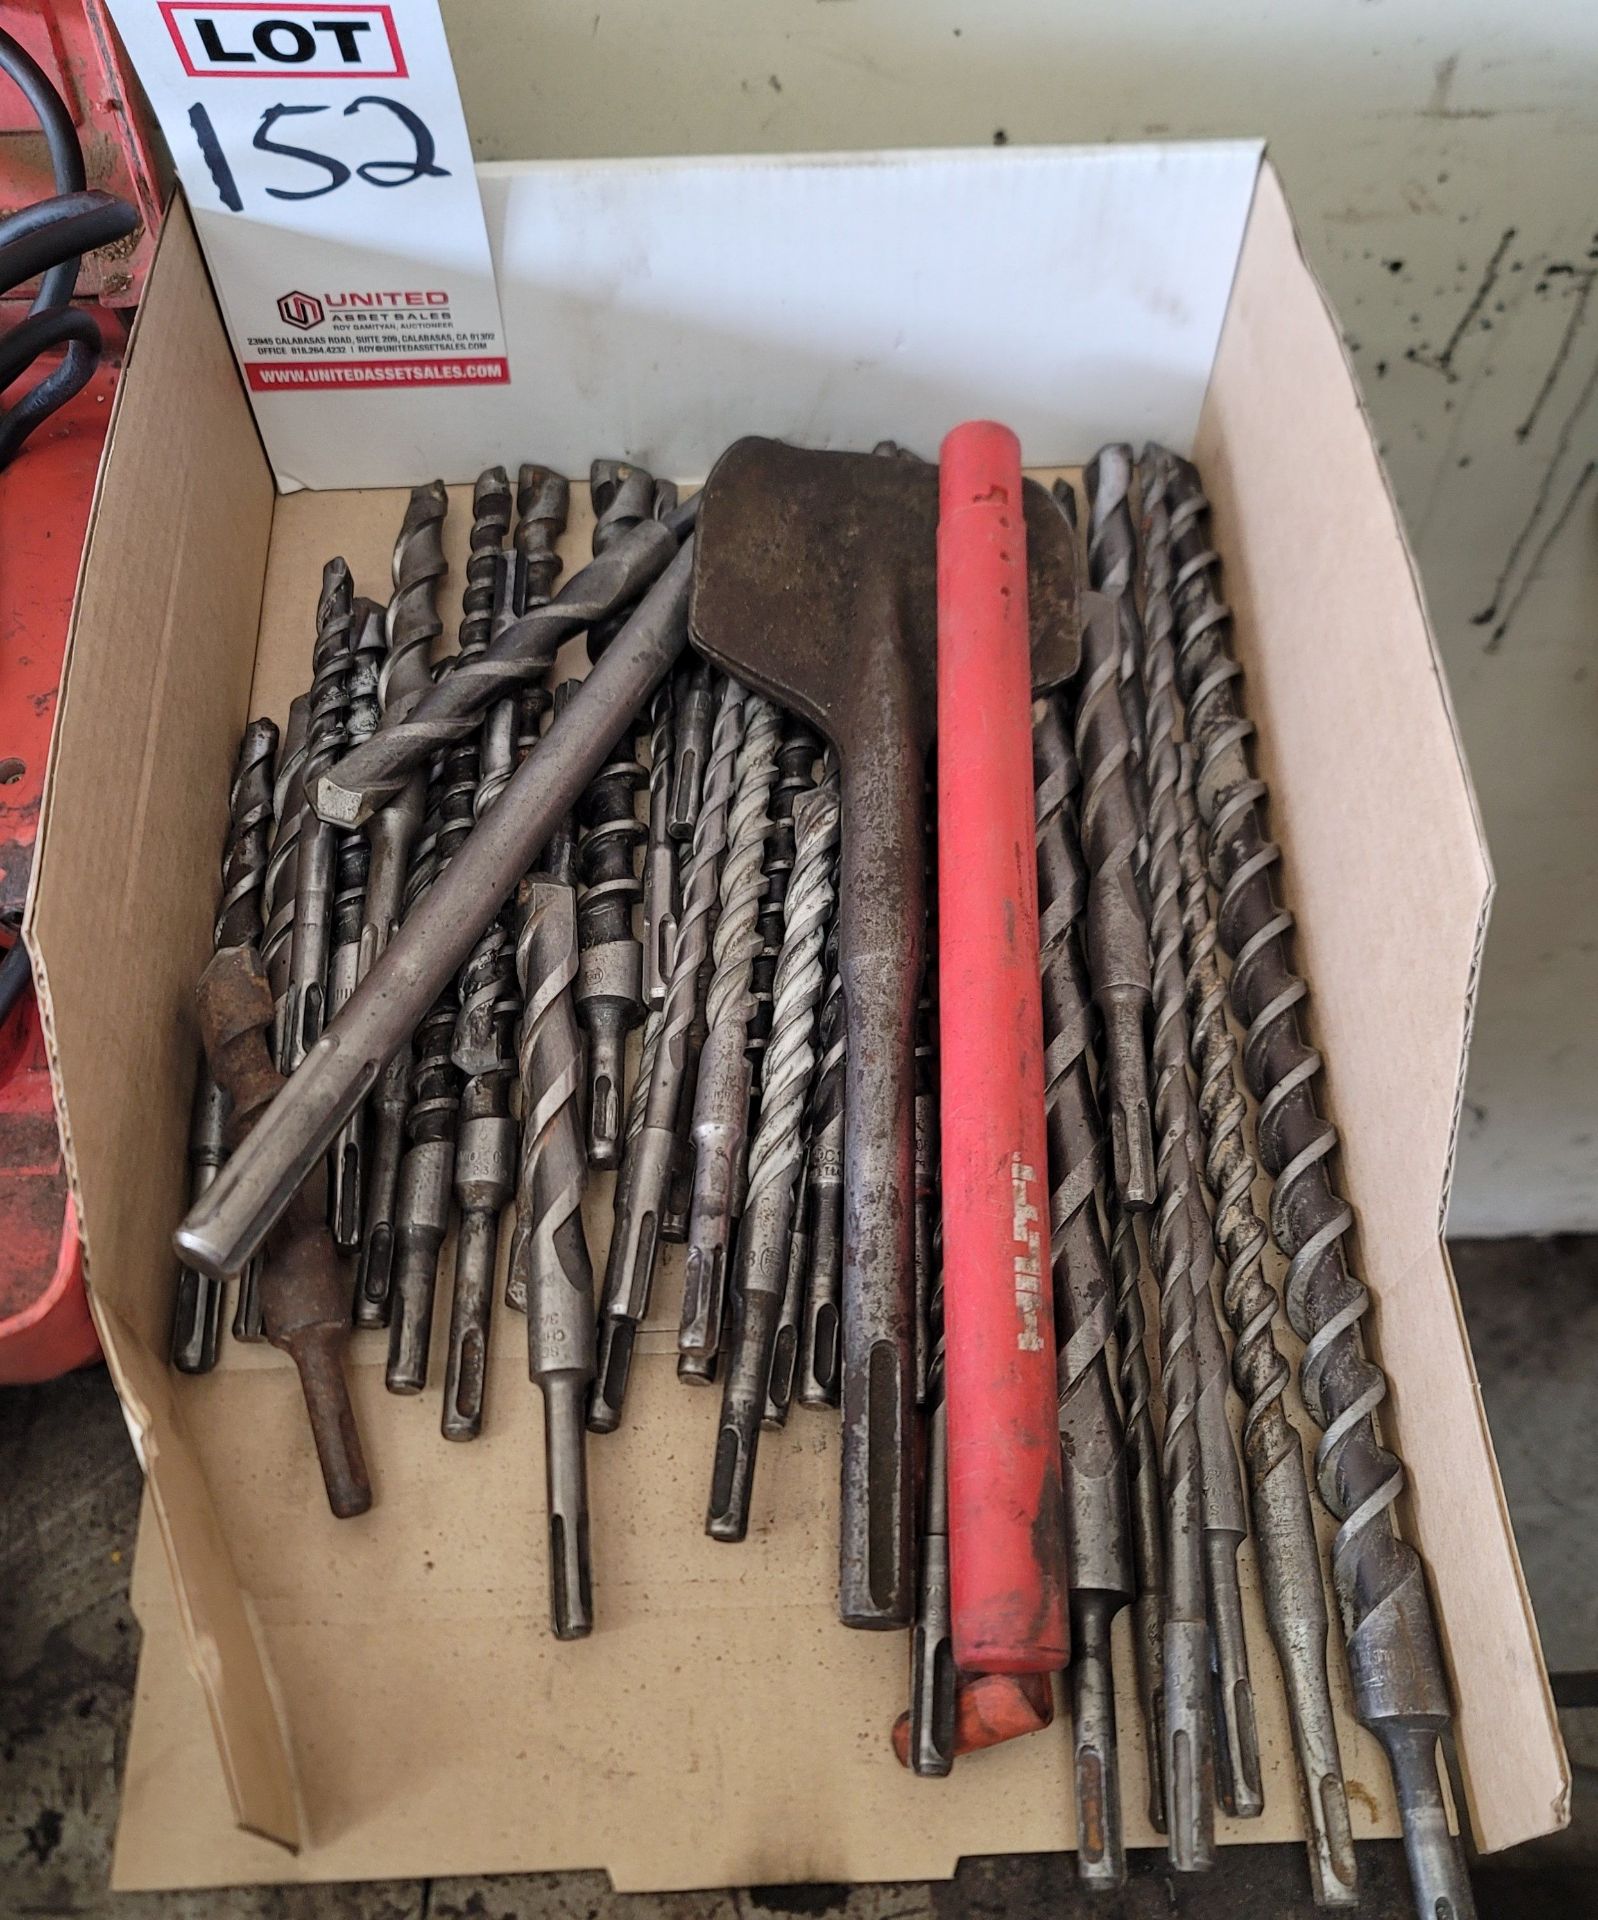 LOT - CONCRETE DRILL BITS FOR ROTARY HAMMERS